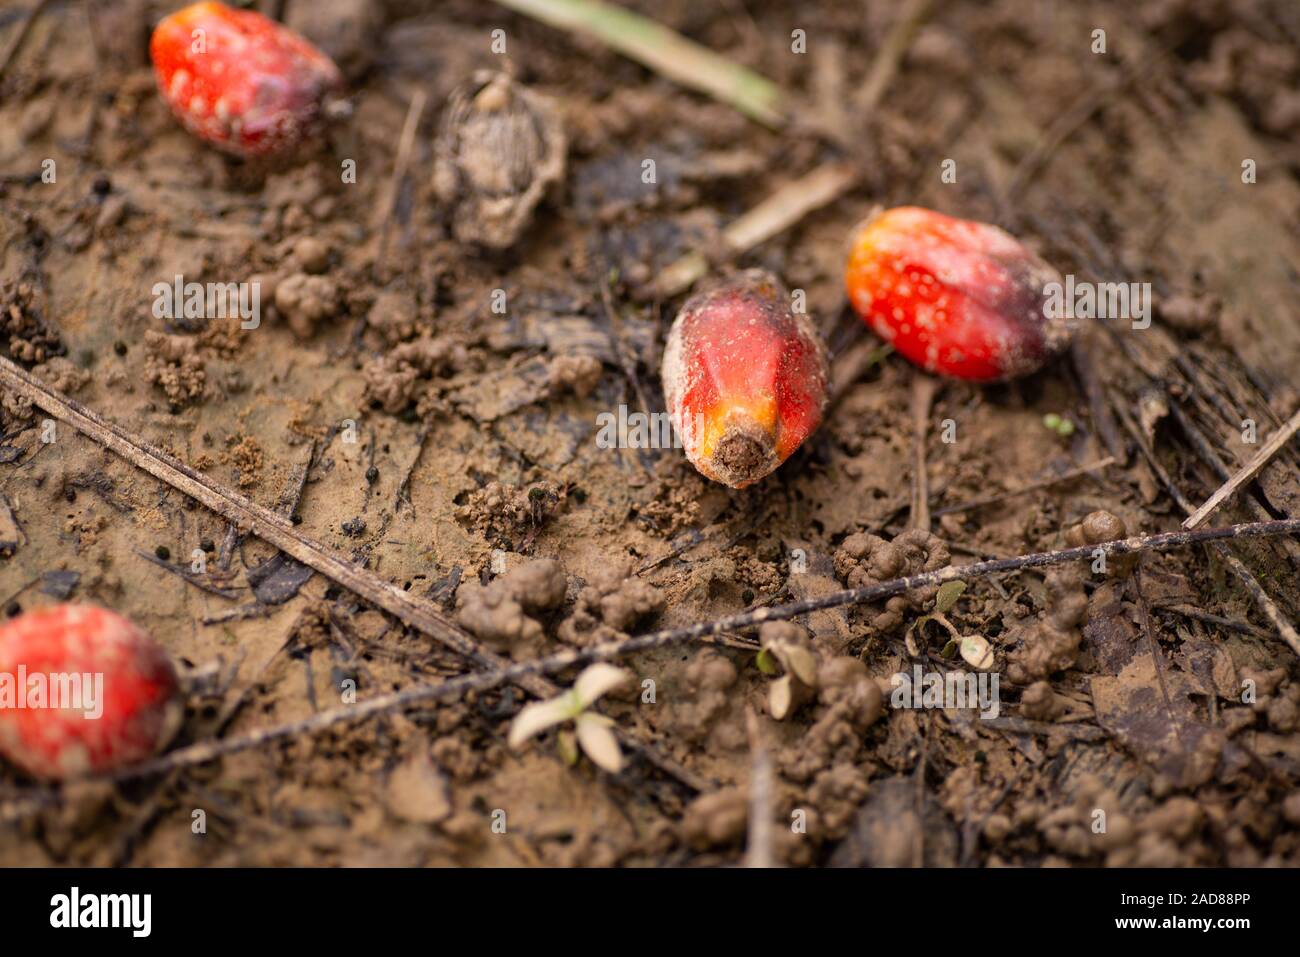 Palm oil fruits on the ground Stock Photo